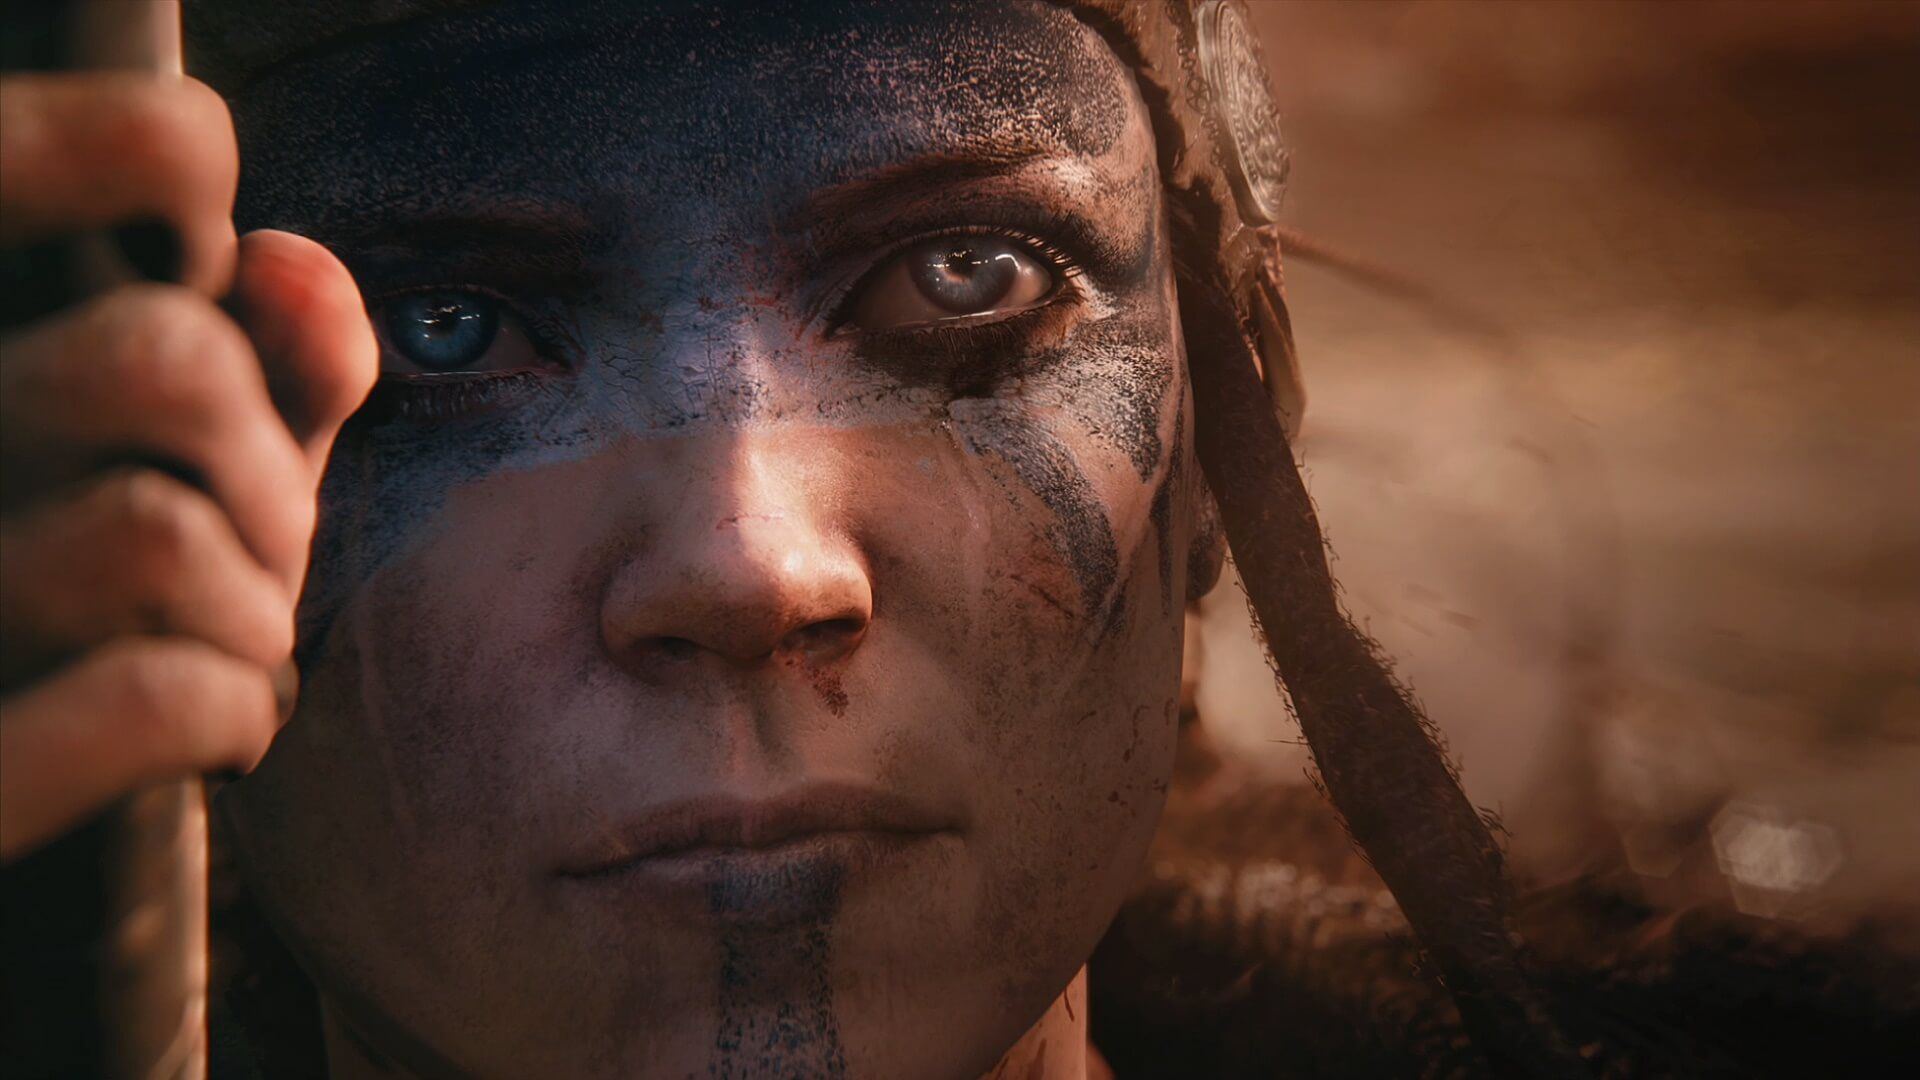 Hellblade To Run at 1440P on PS4 Pro; 4K@60 on PC Will Require an Absolute  Beast, Says Ninja Theory